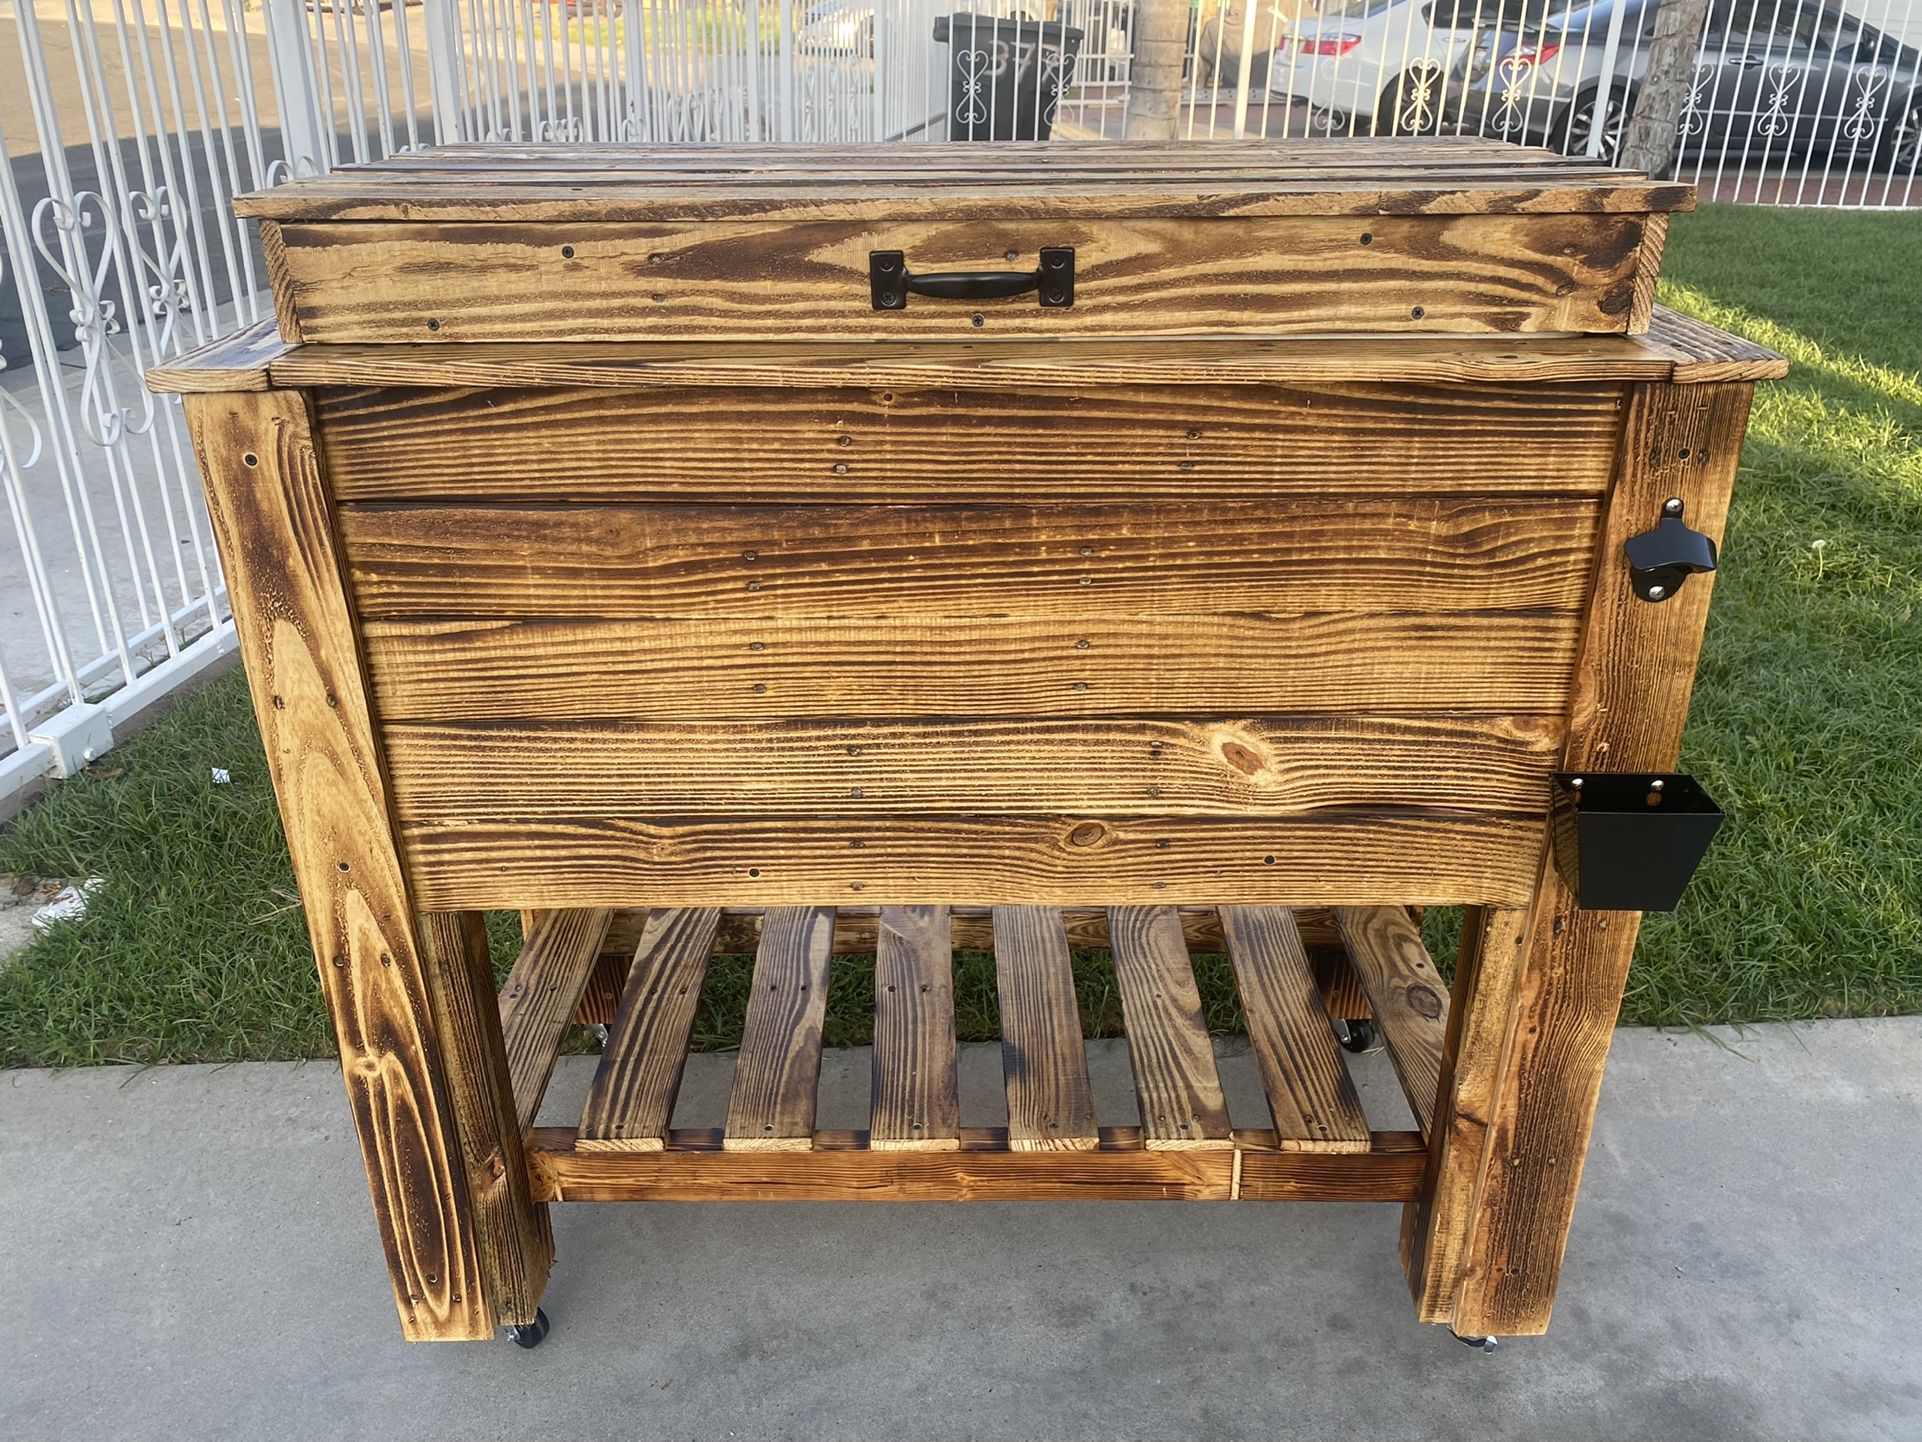 Burned Wooden Cooler With Swivel Wheels 